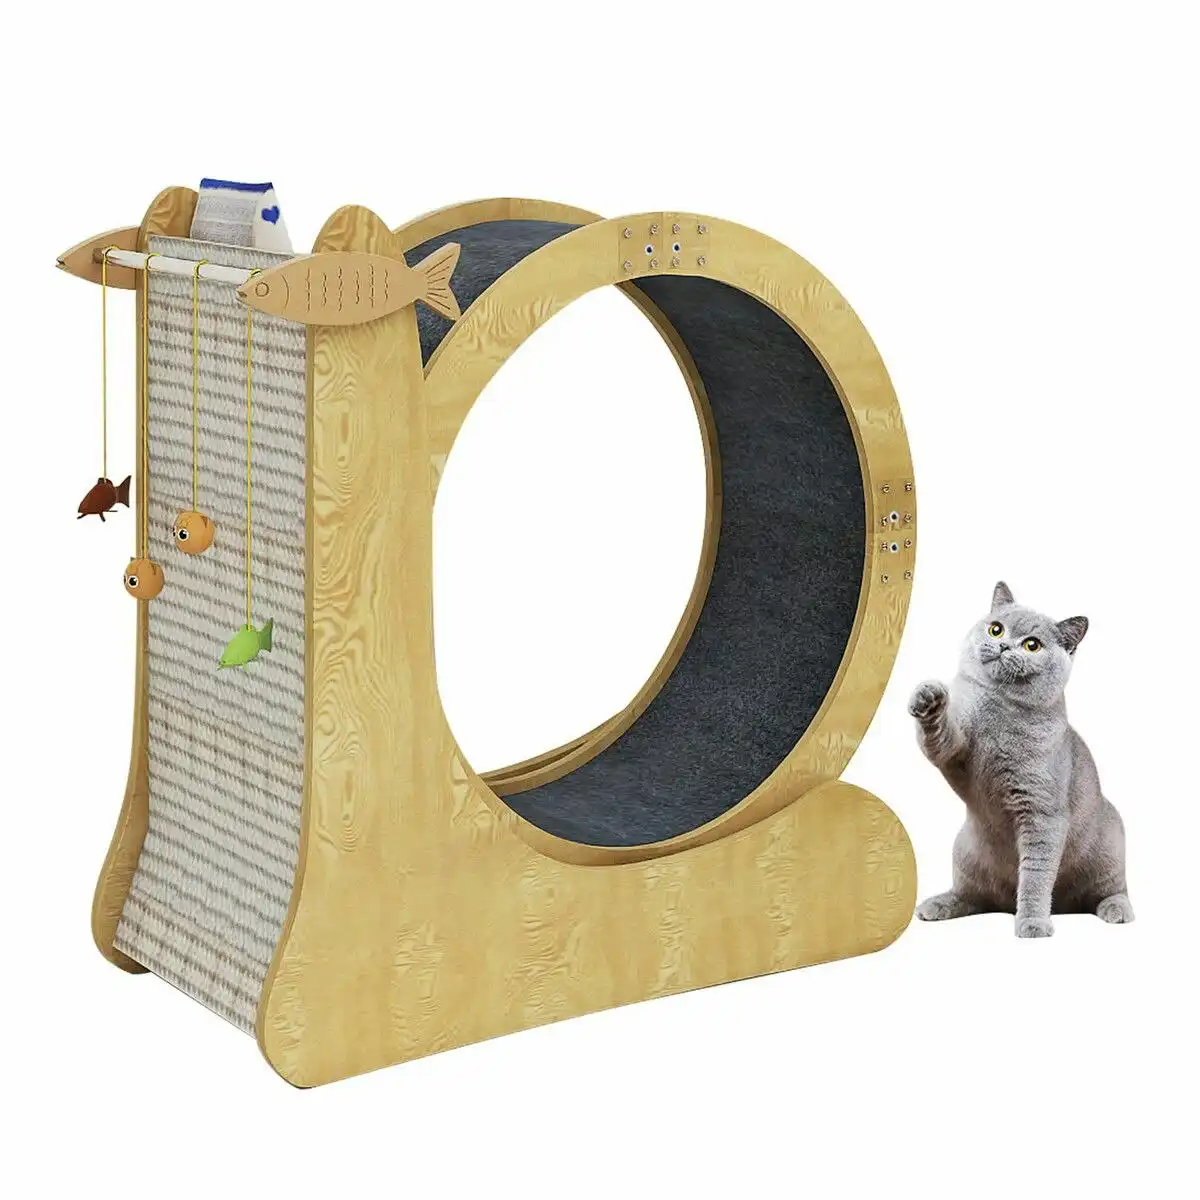 Pet Scene Cat Exercise Wheel Toy Running Exerciser Treadmill Furniture Scratcher Board Roller Play Gym Sports Equipment with Carpet Runway